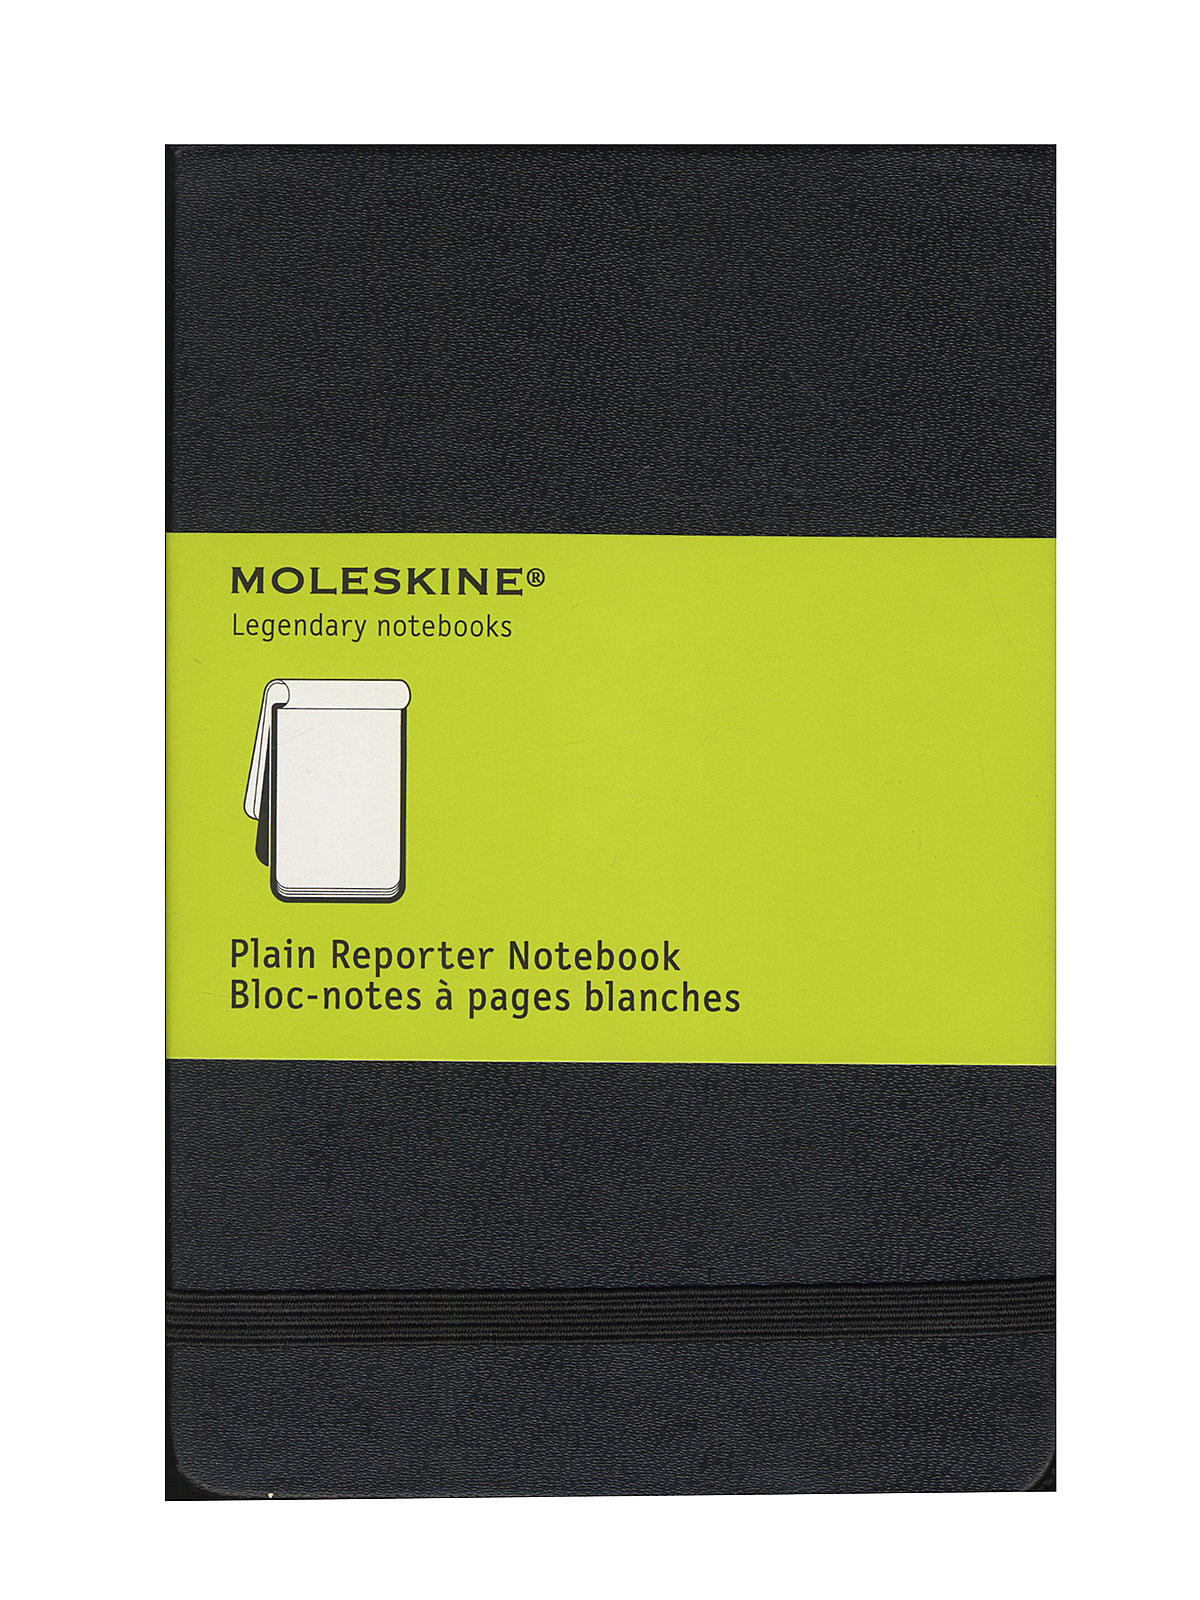 Hard Cover Reporter Notebooks 3 1 2 In. X 5 1 2 In. 192 Pages Blank